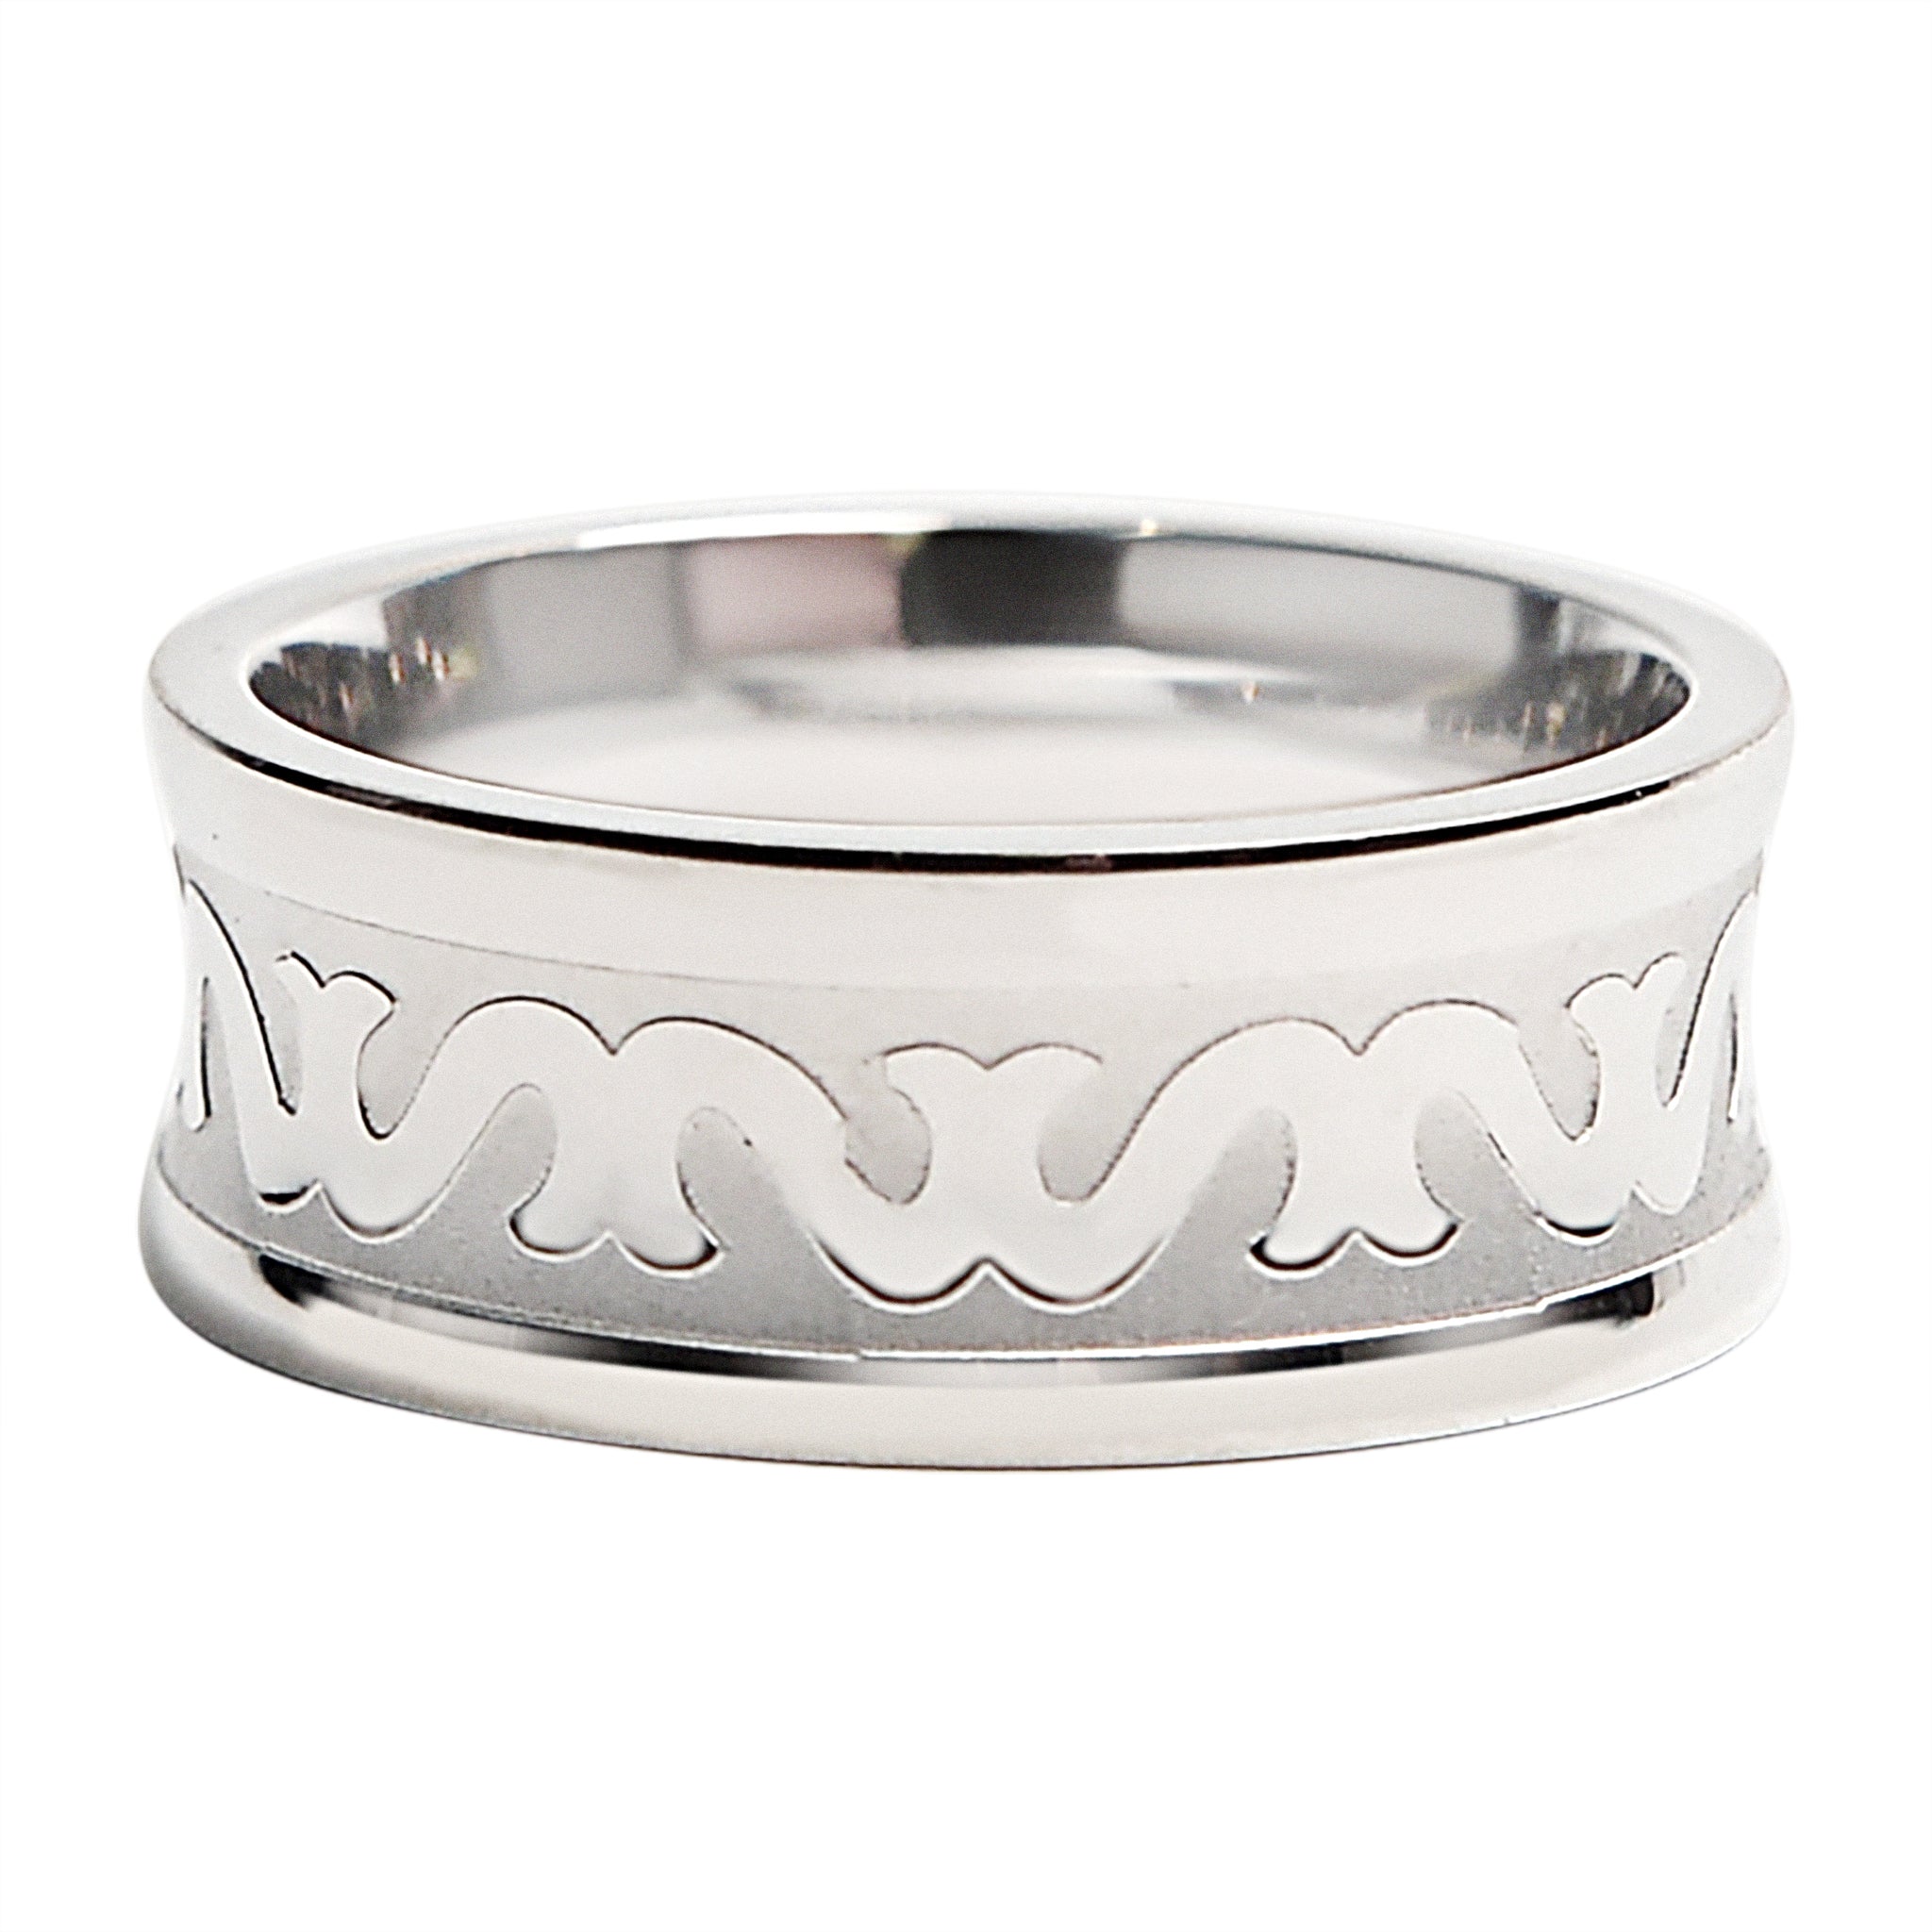 Stainless Steel Grooved Filigree Center Ring / NCZ0145-stainless steel good for jewelry- stainless steel jewelry for women- womens stainless steel jewelry- stainless steel cleaner for jewelry- stainless steel jewelry wire